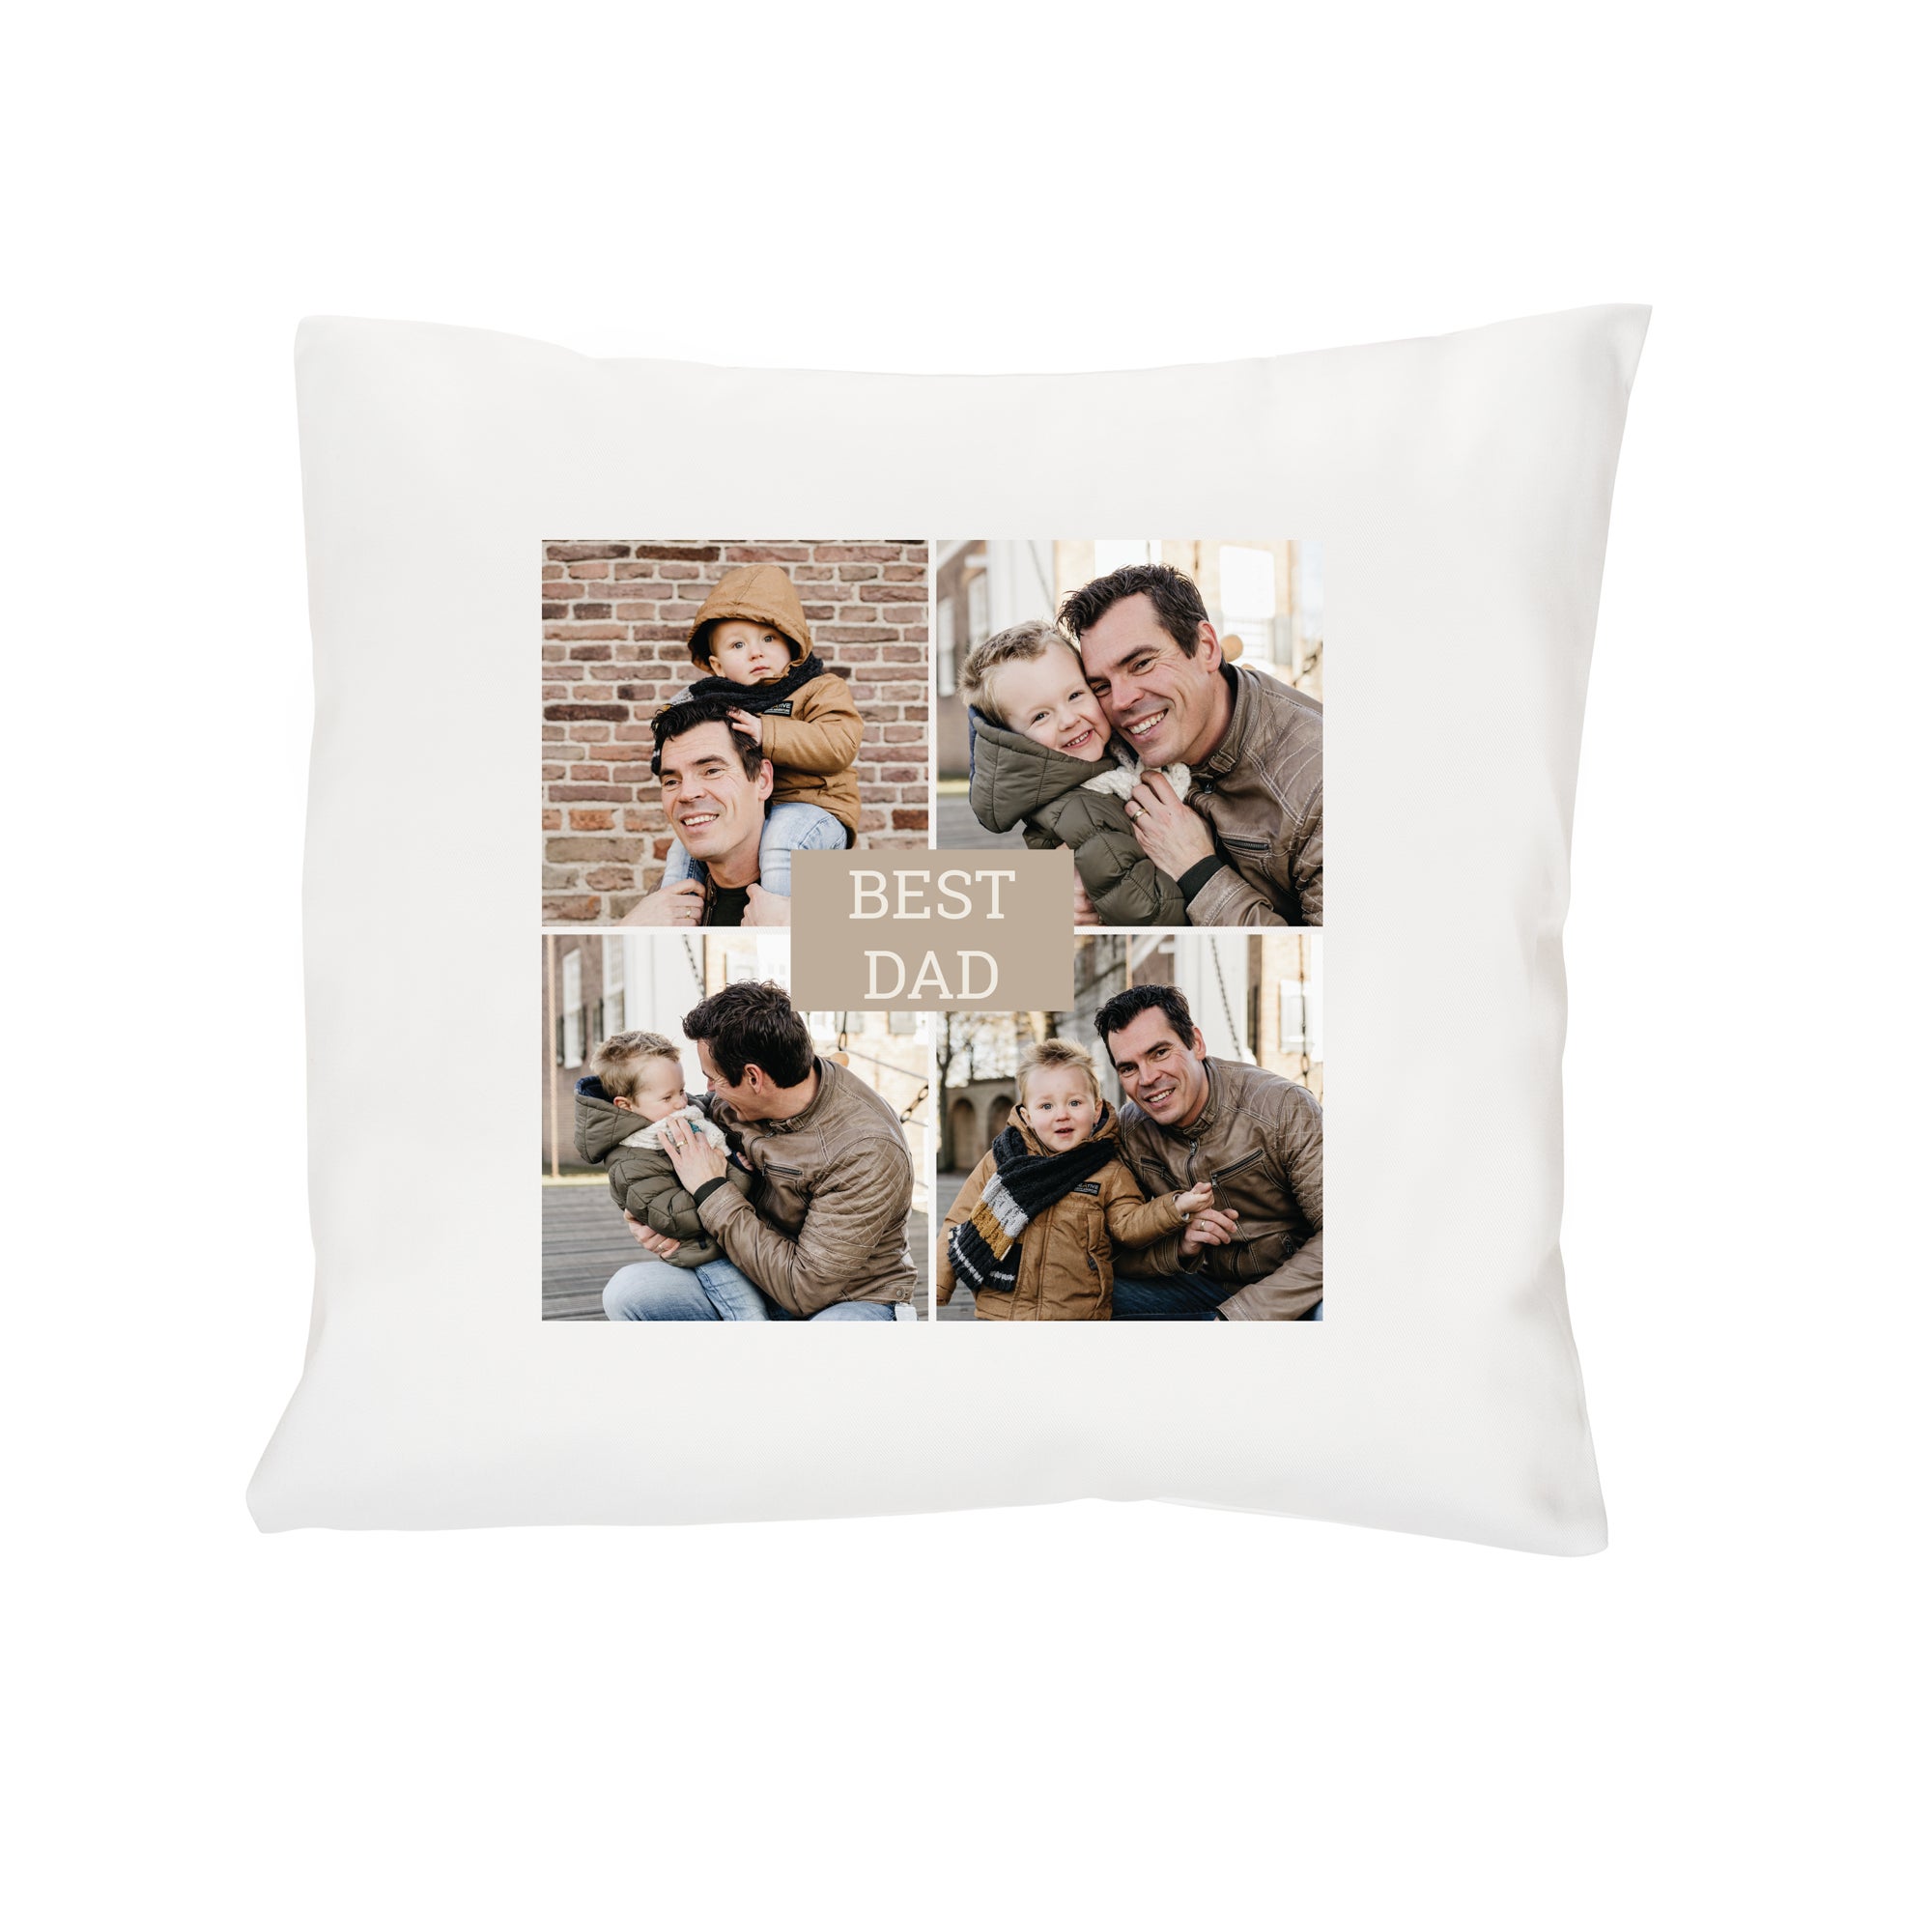 Personalised cushion - Father's Day - White - 40 x 40 cm